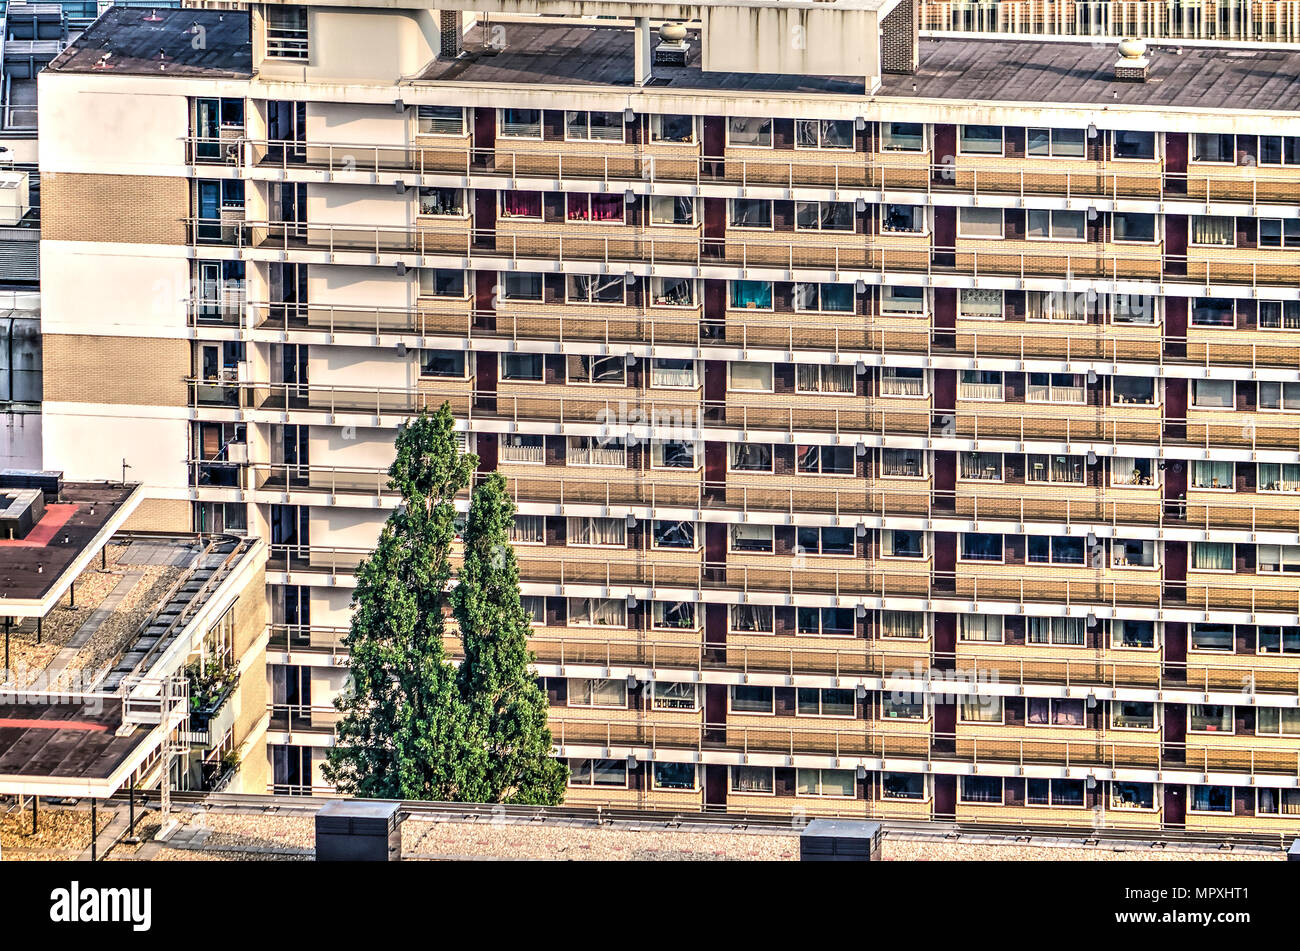 Rotterdam, The Netherlands, May 11, 2018: One of the modern residential slabs in the post-war Lijnbaan district Stock Photo